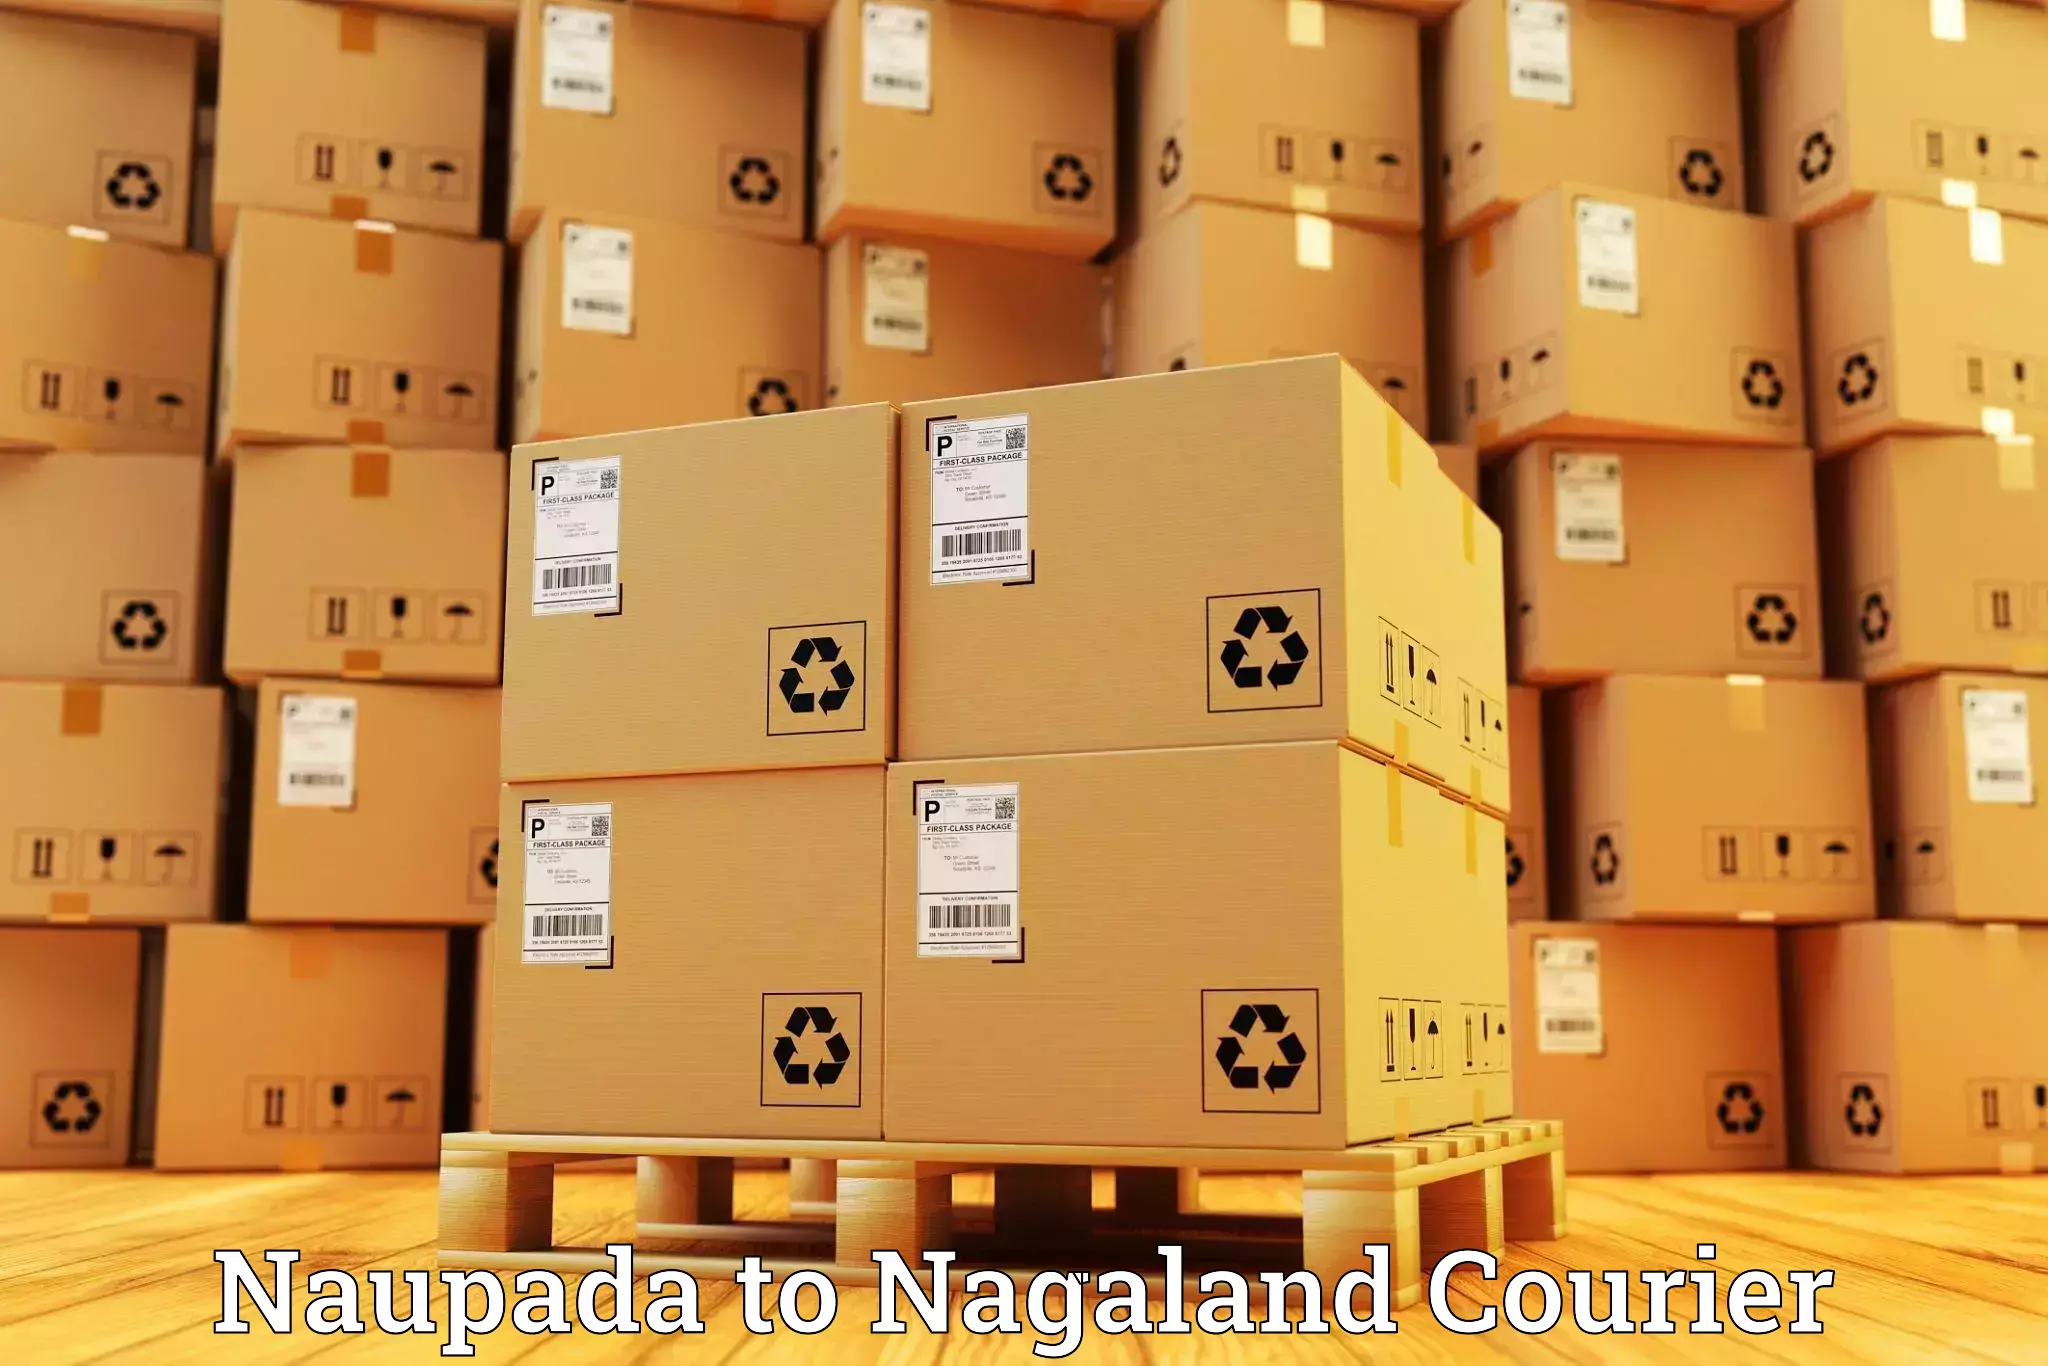 Business delivery service Naupada to Nagaland